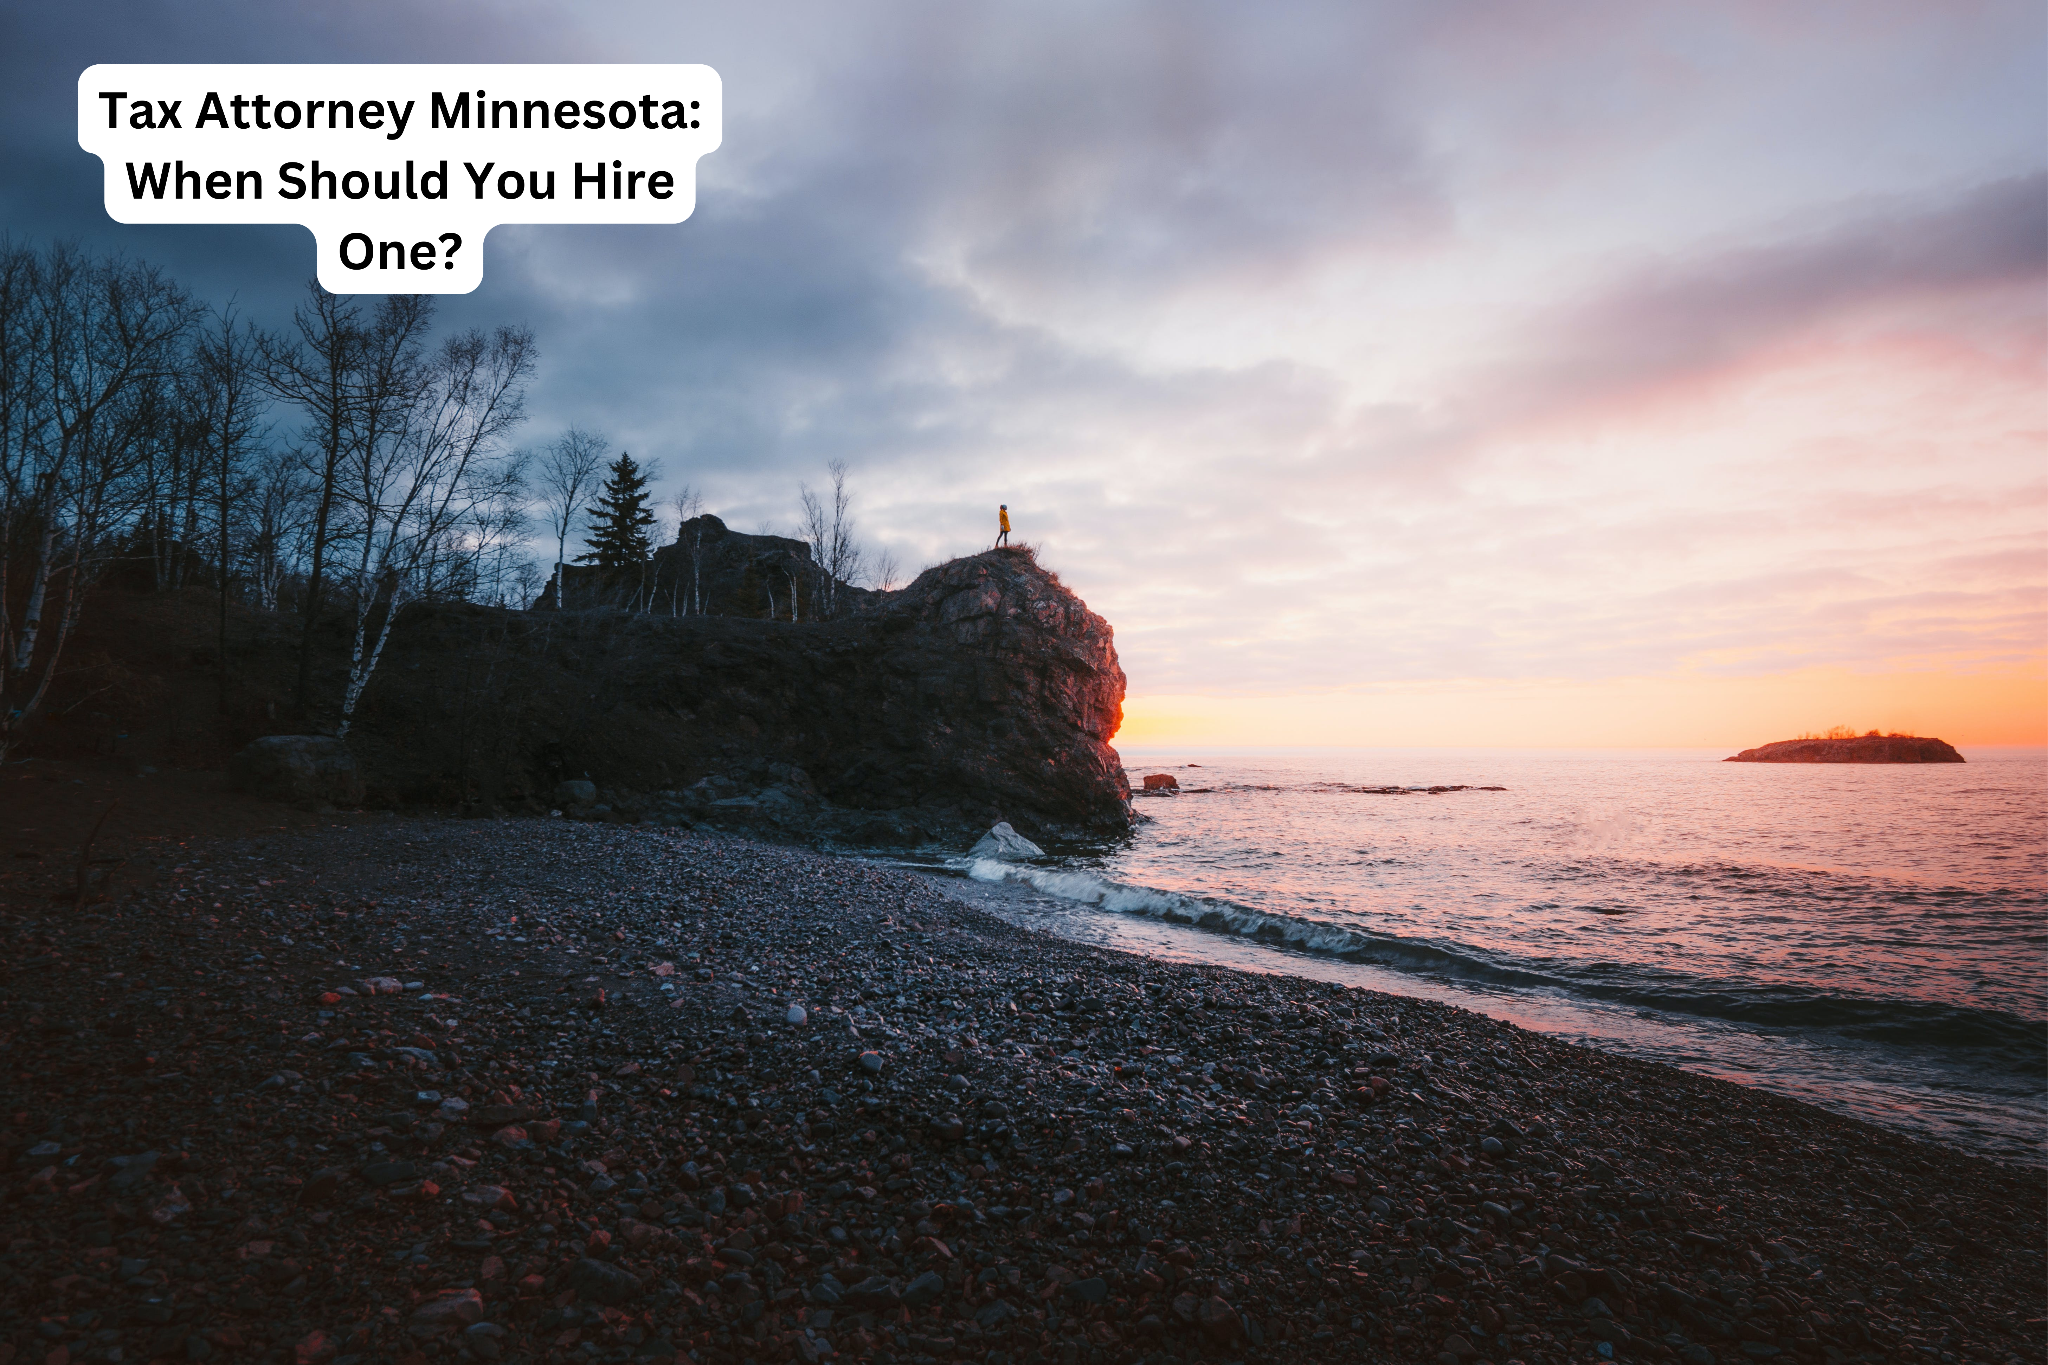 Tax Attorney Minnesota: When Should You Hire One?